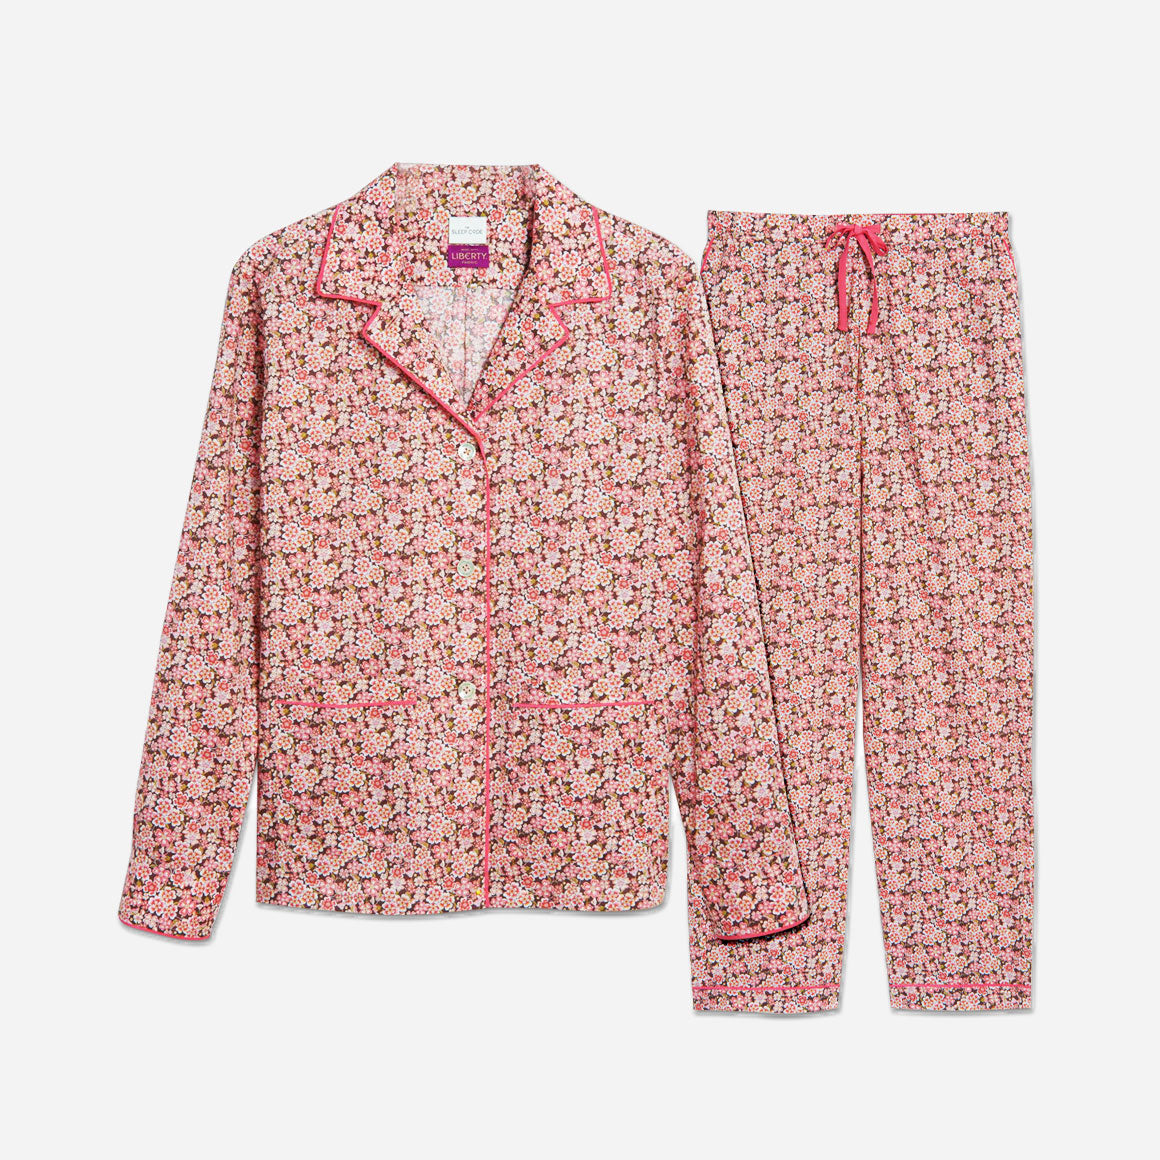 The pajama set includes a classic button-up top with a collar, two patch pockets, and functional button cuffs. The matching pair of pants features a comfortable elastic waistband, drawstring, and side-seam pockets. The long sleeves offer extra coverage and warmth for cooler evenings.